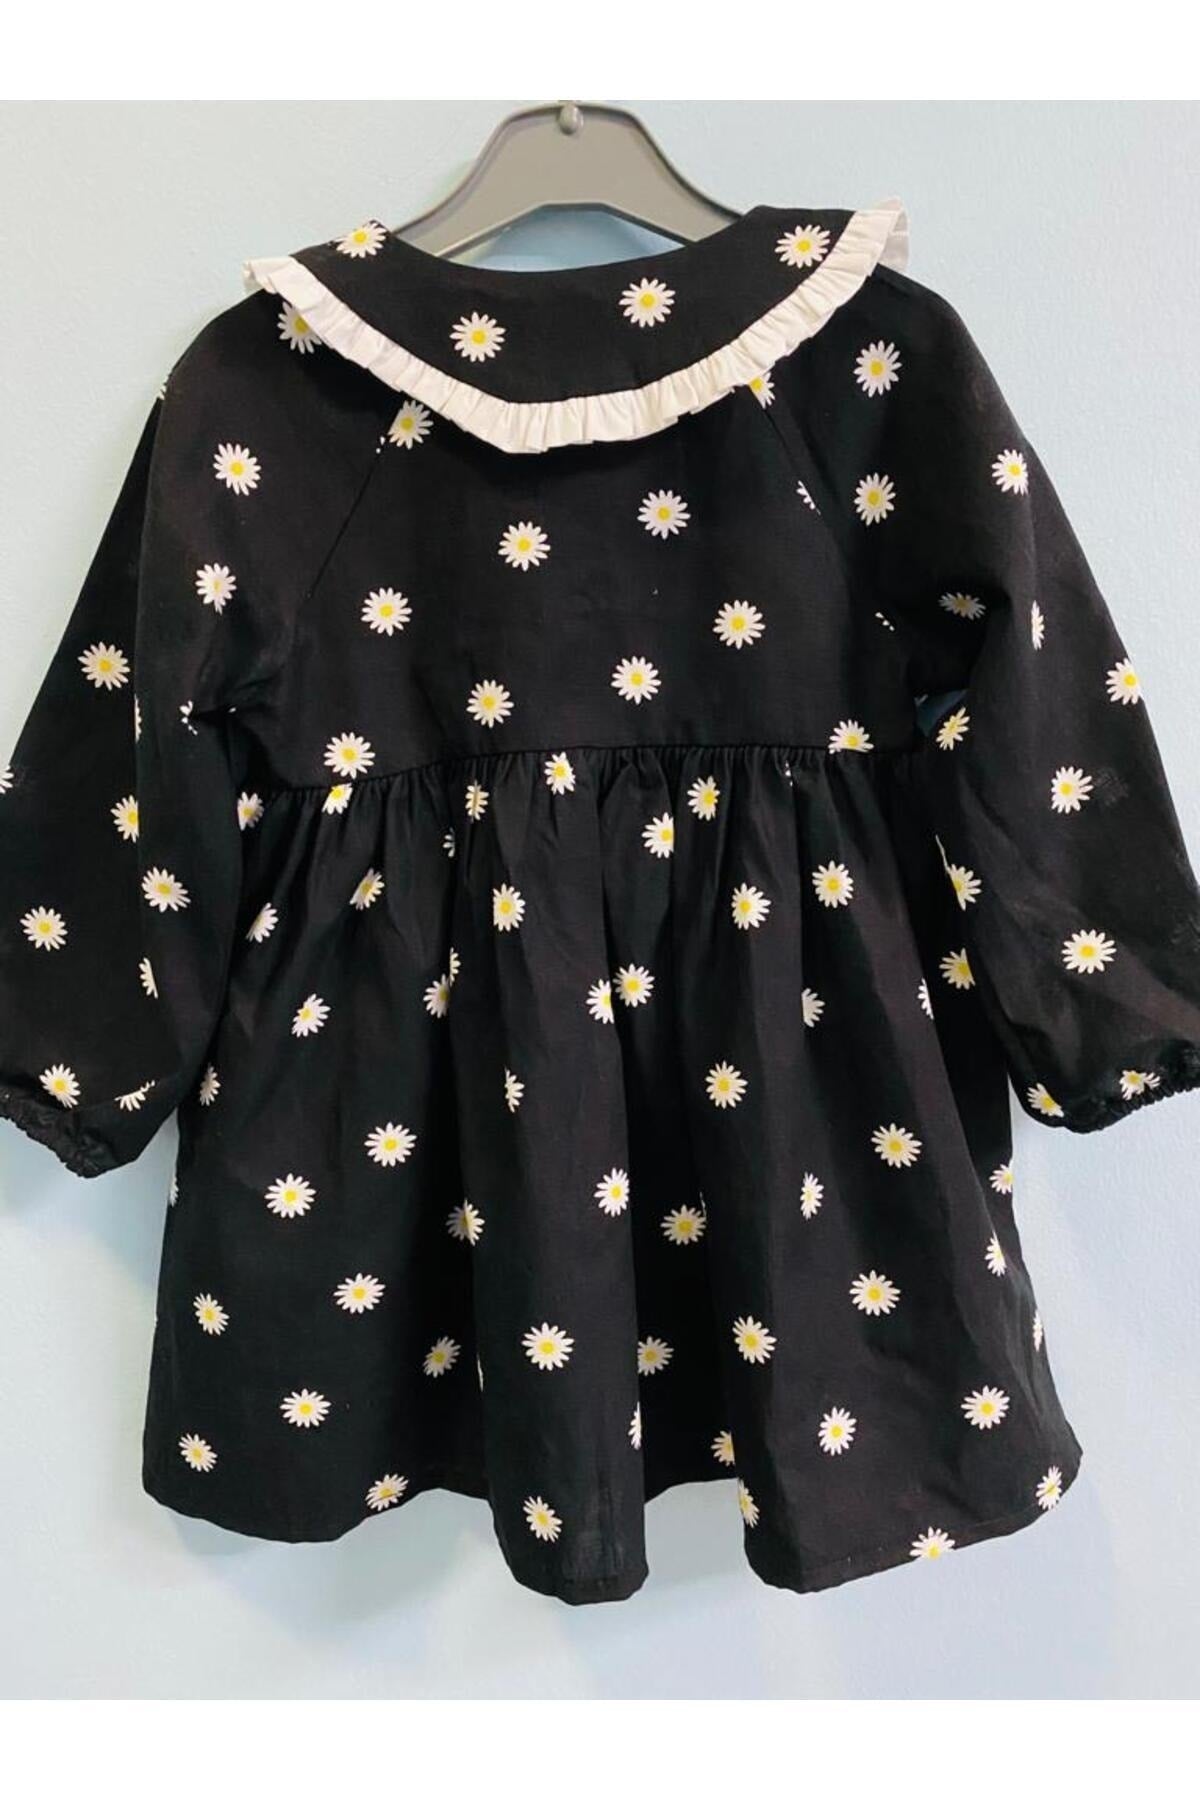 DAISY PATTERNED LONG SLEEVE DRESS WITH RUBBED COLLAR